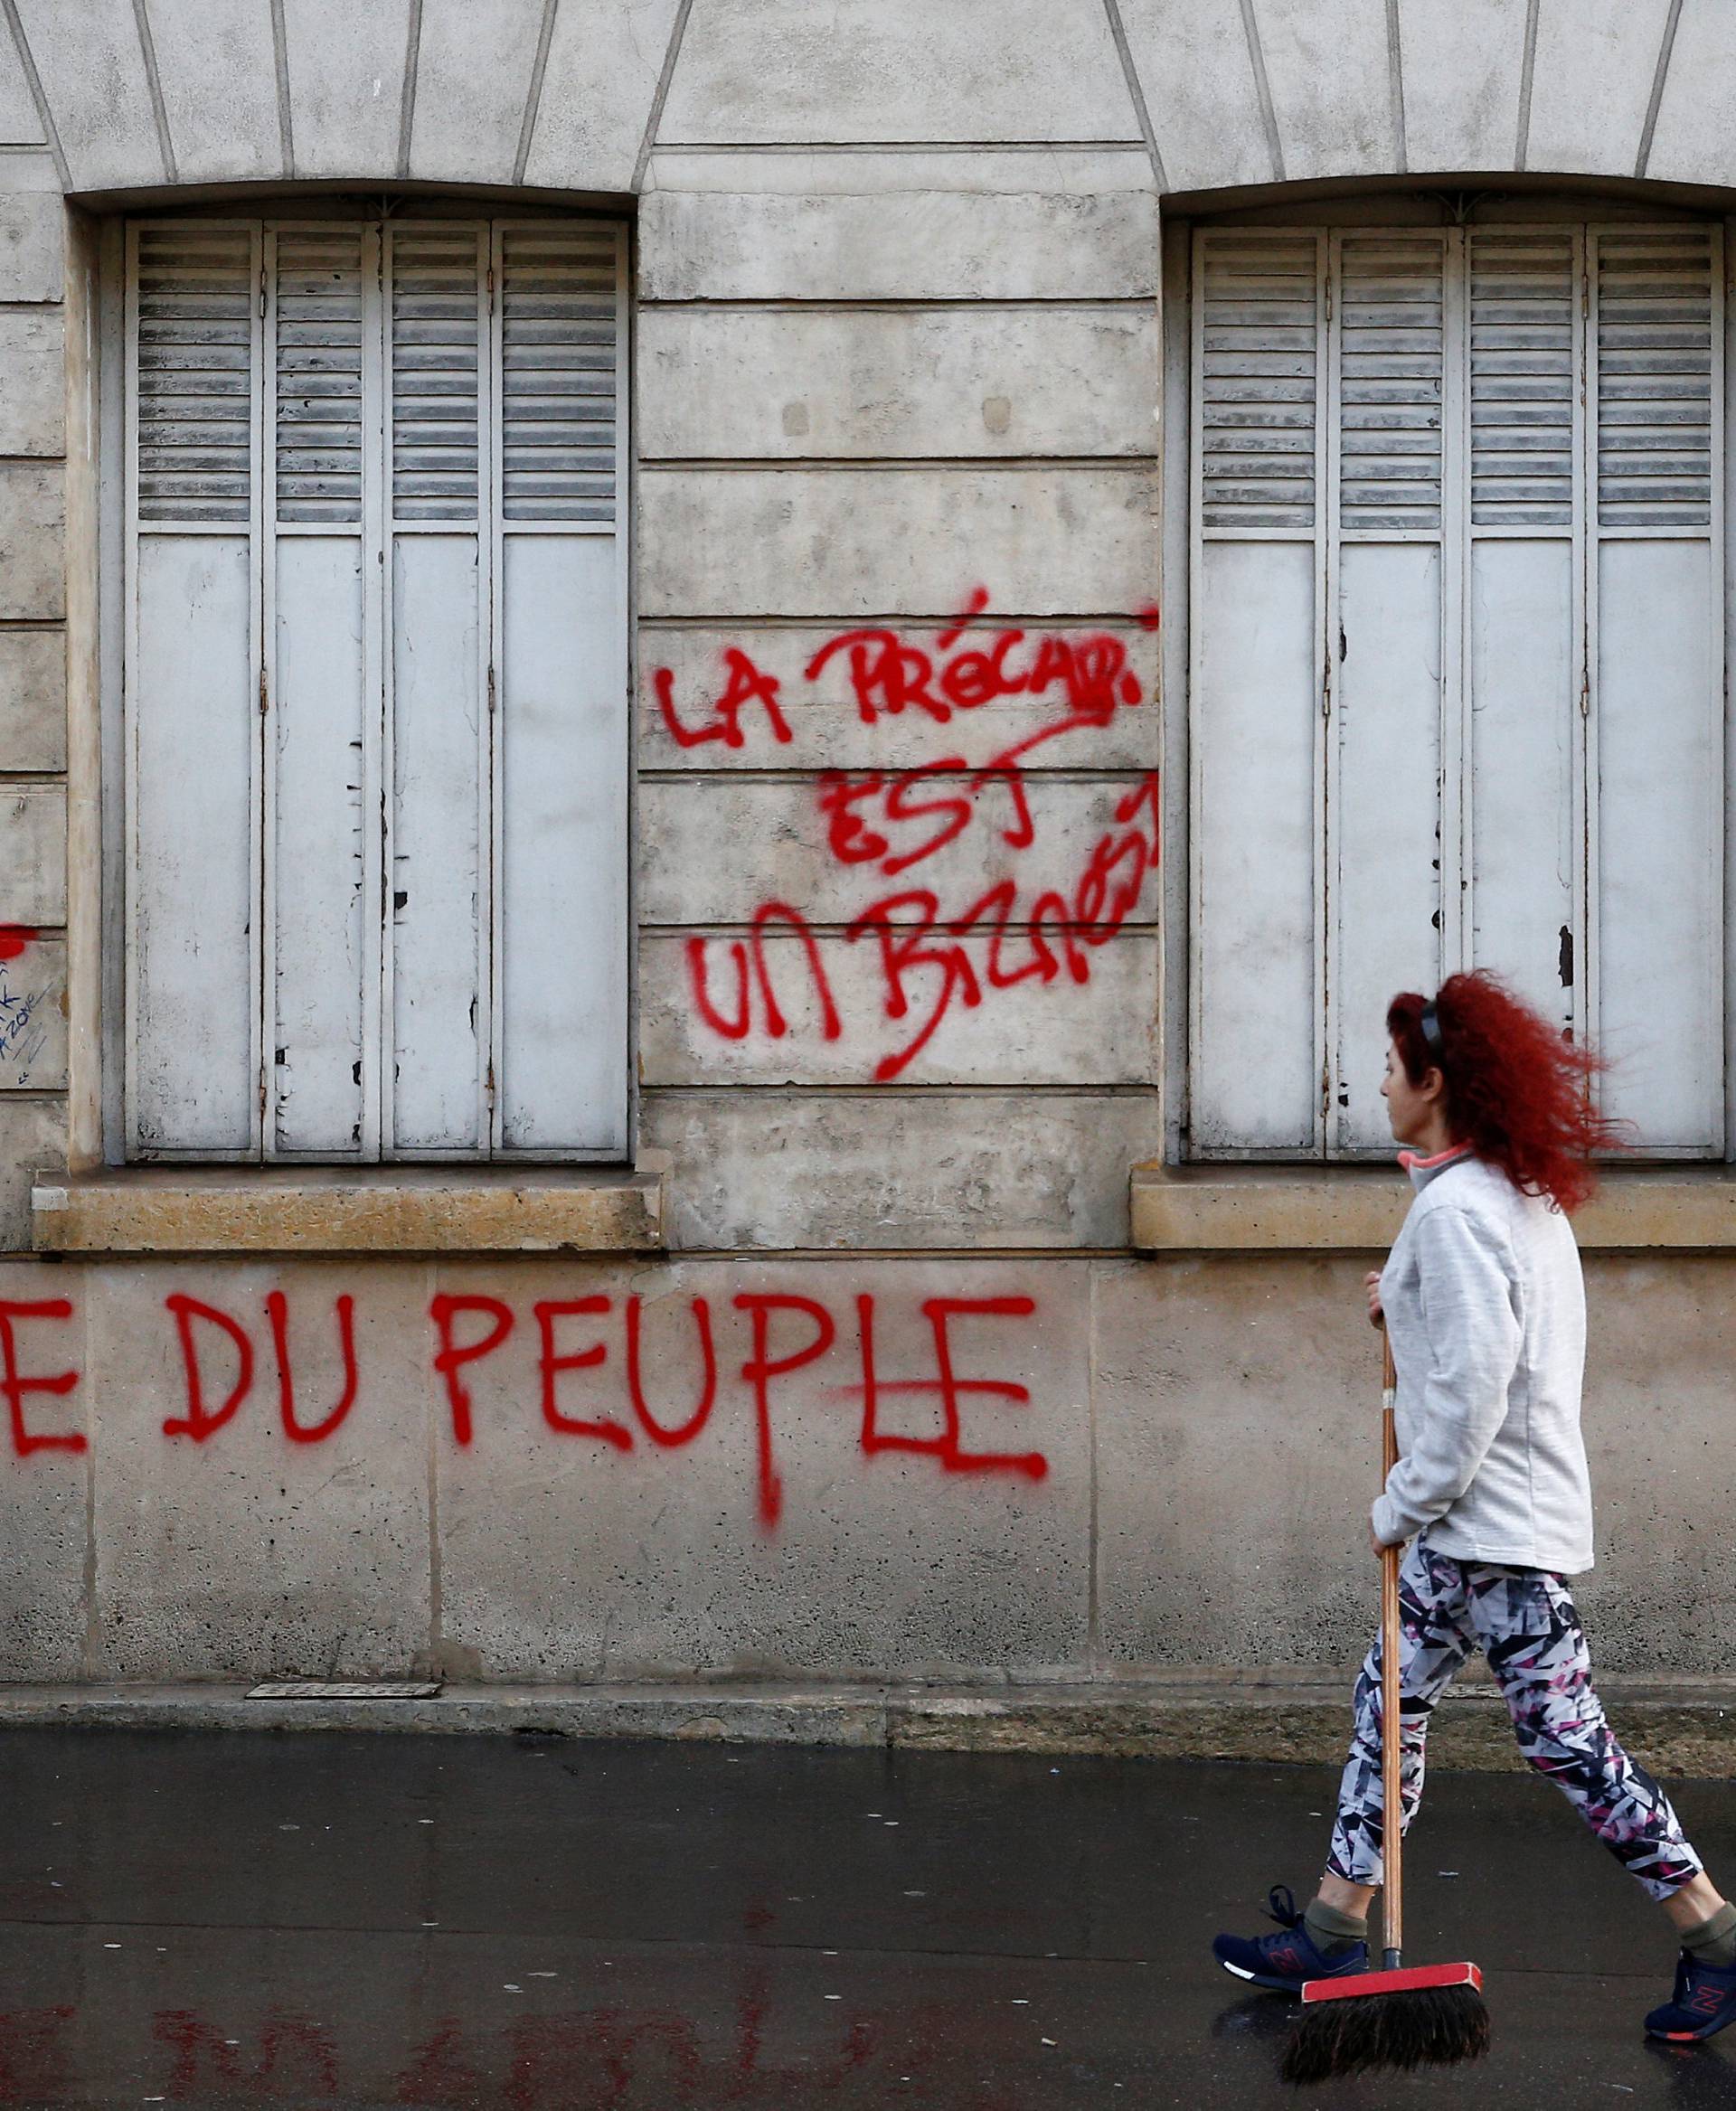 Graffiti is written on the facade of a building the day after clashes during a national day of protest by the "yellow vests" movement in Paris